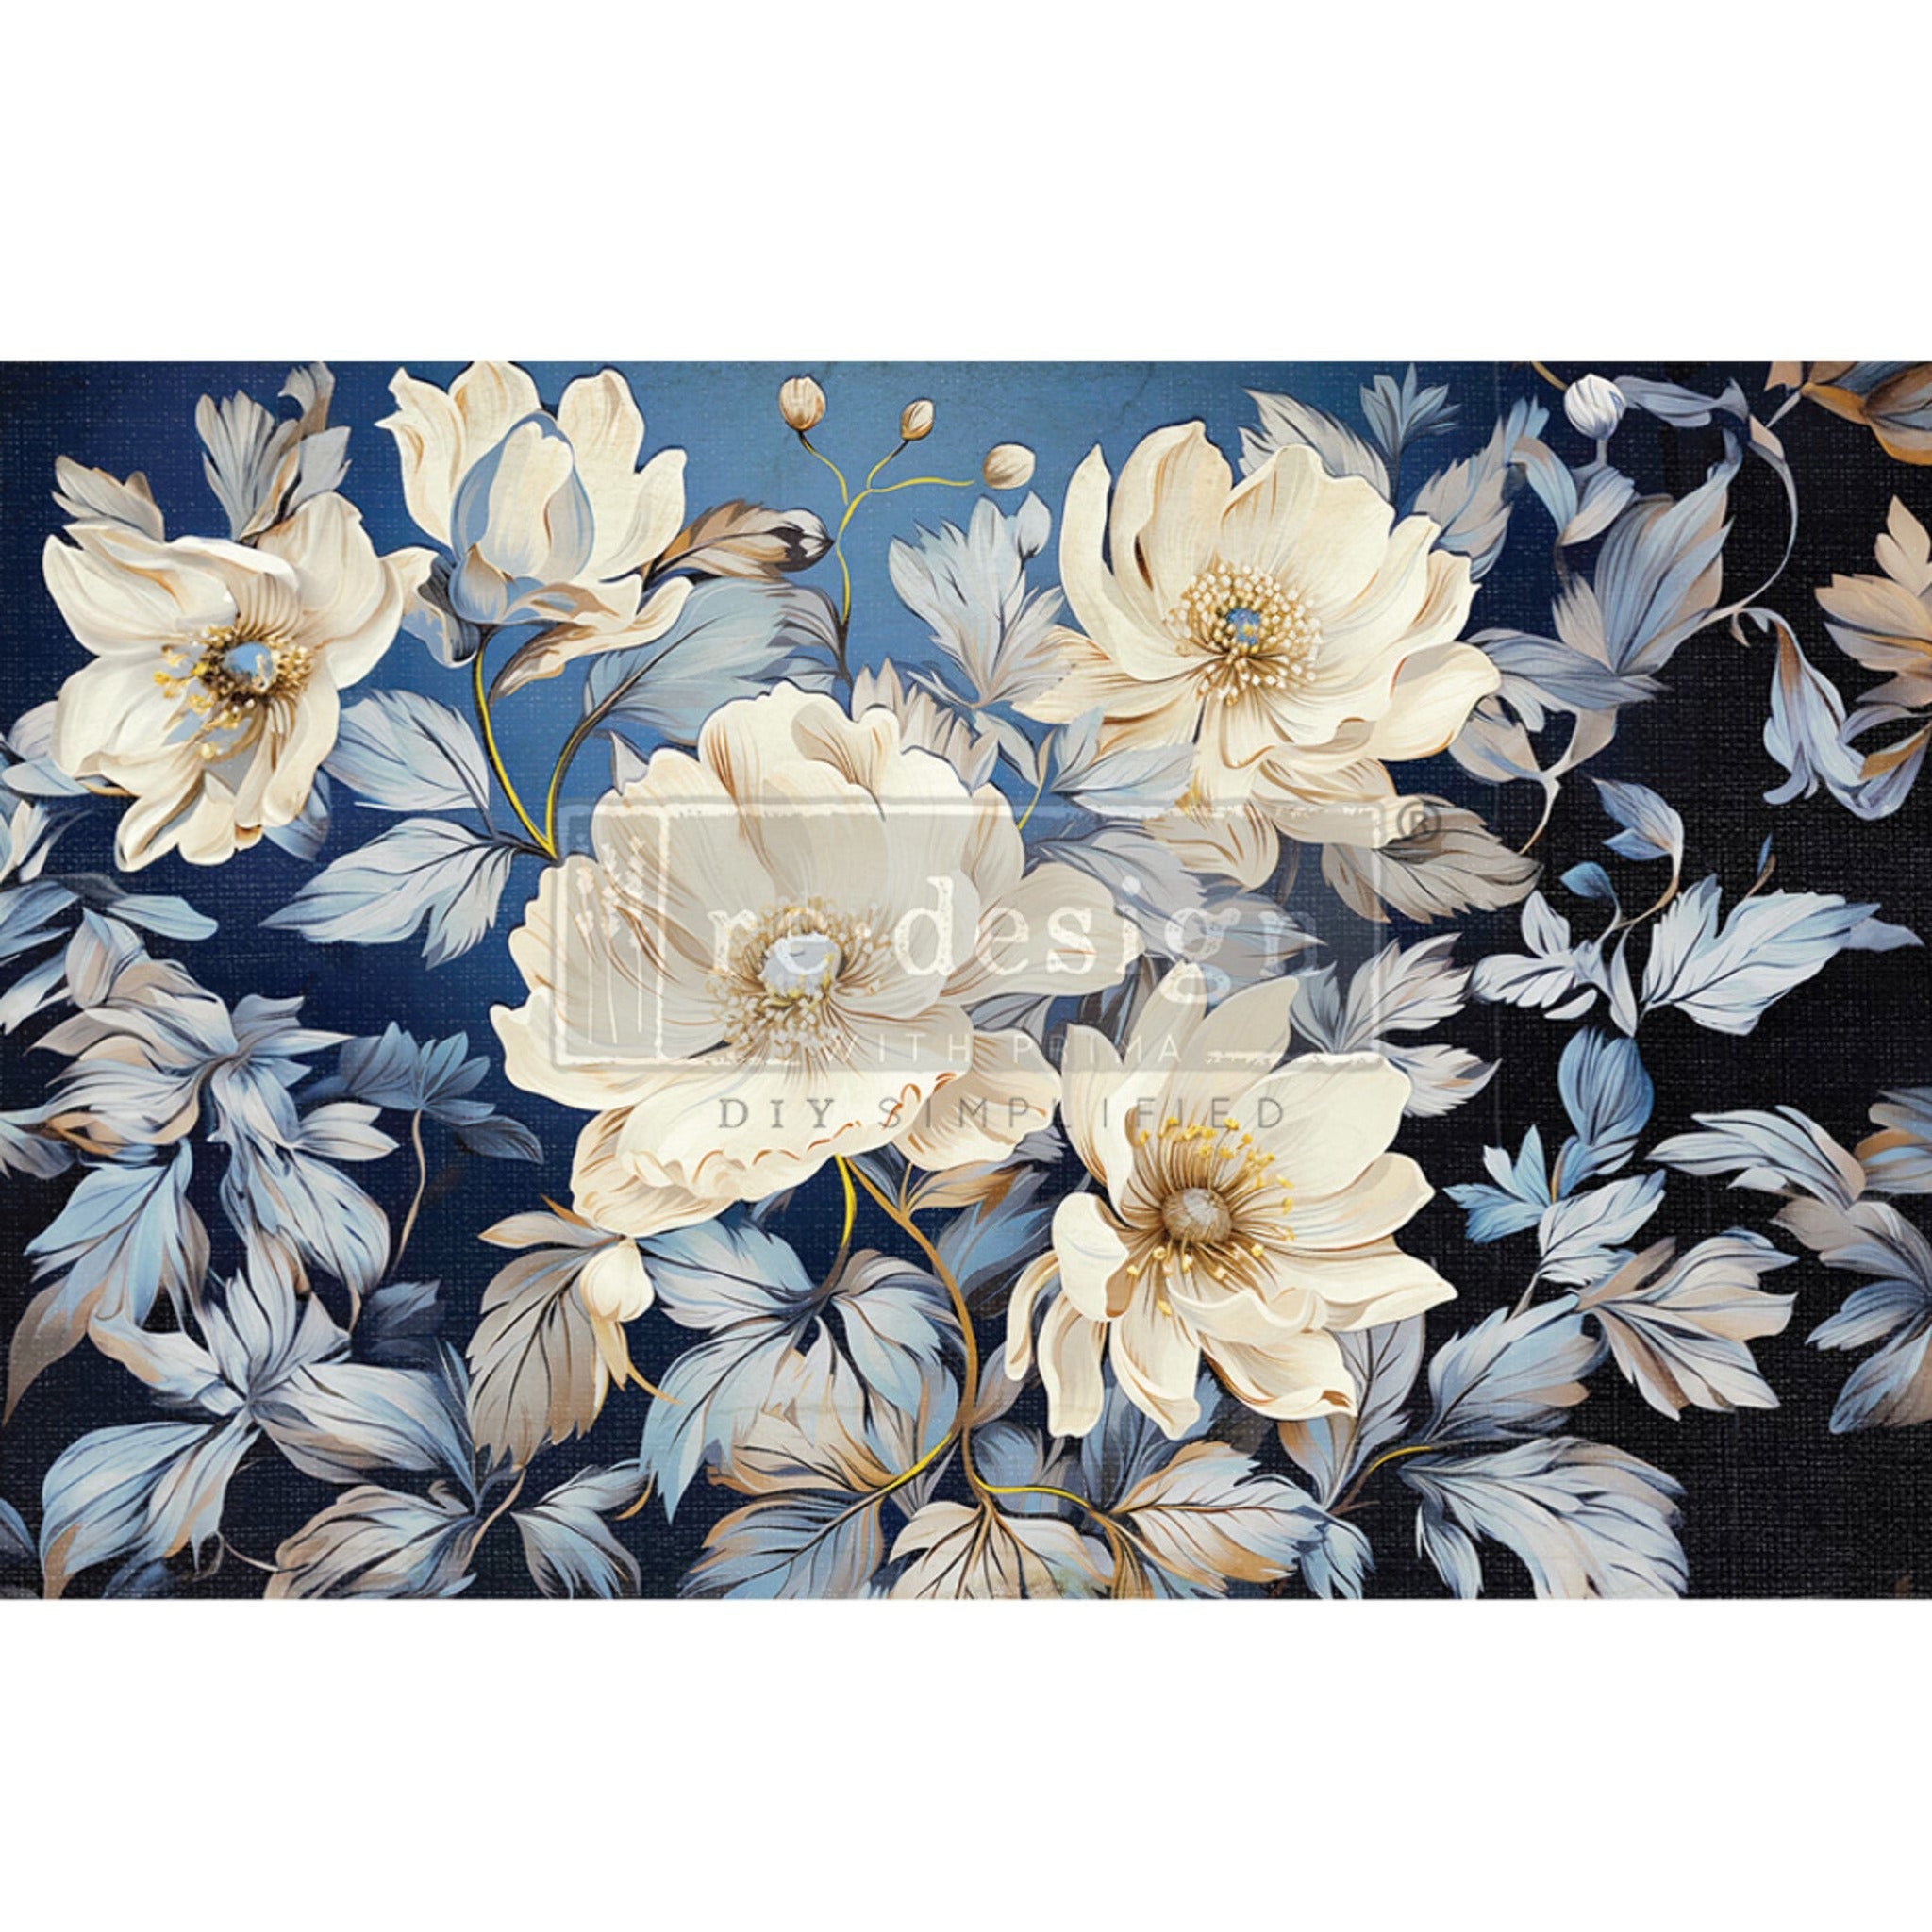 Tissue paper design that features large white flower blooms with light blue foliage against a navy blue background. White borders are on the top and bottom.